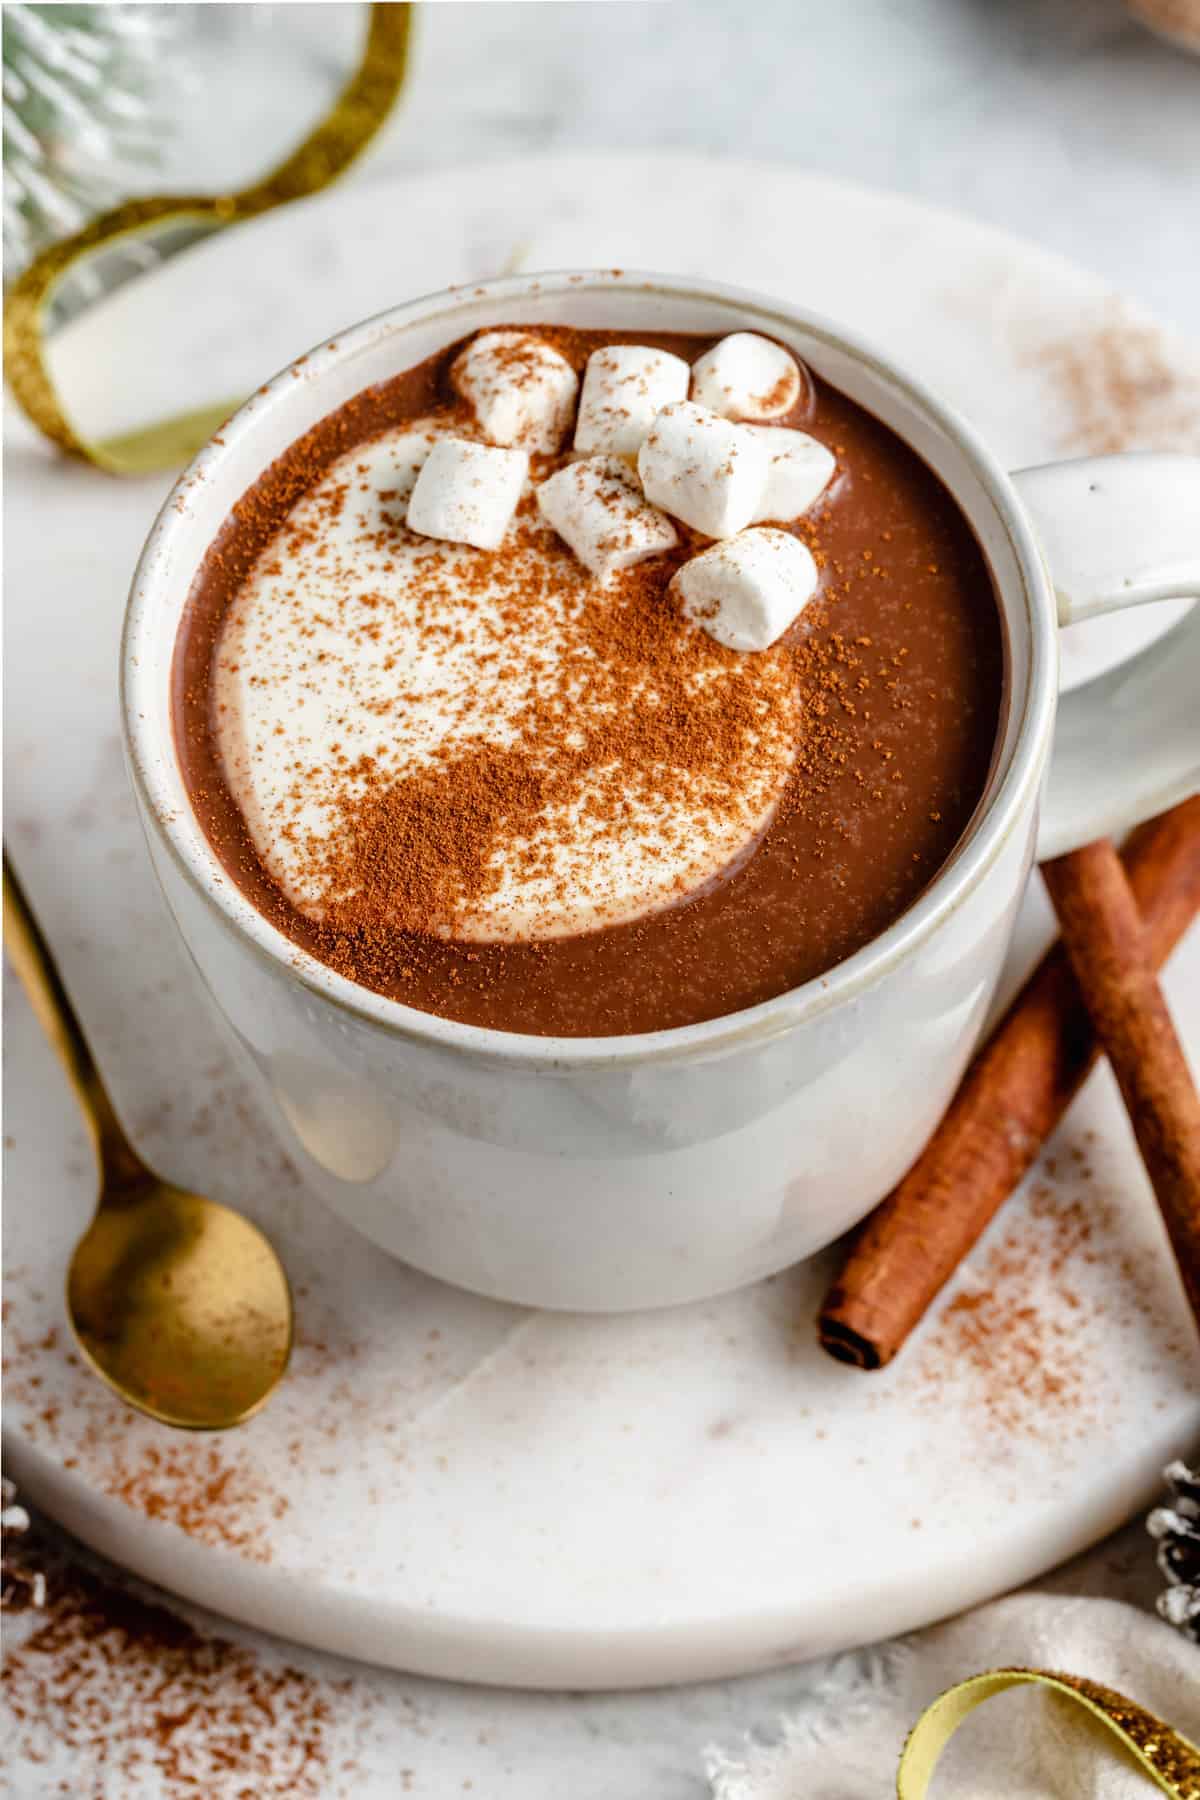 Top view of hot cocoa in mug with whipped cream, cinnamon, and marshmallows